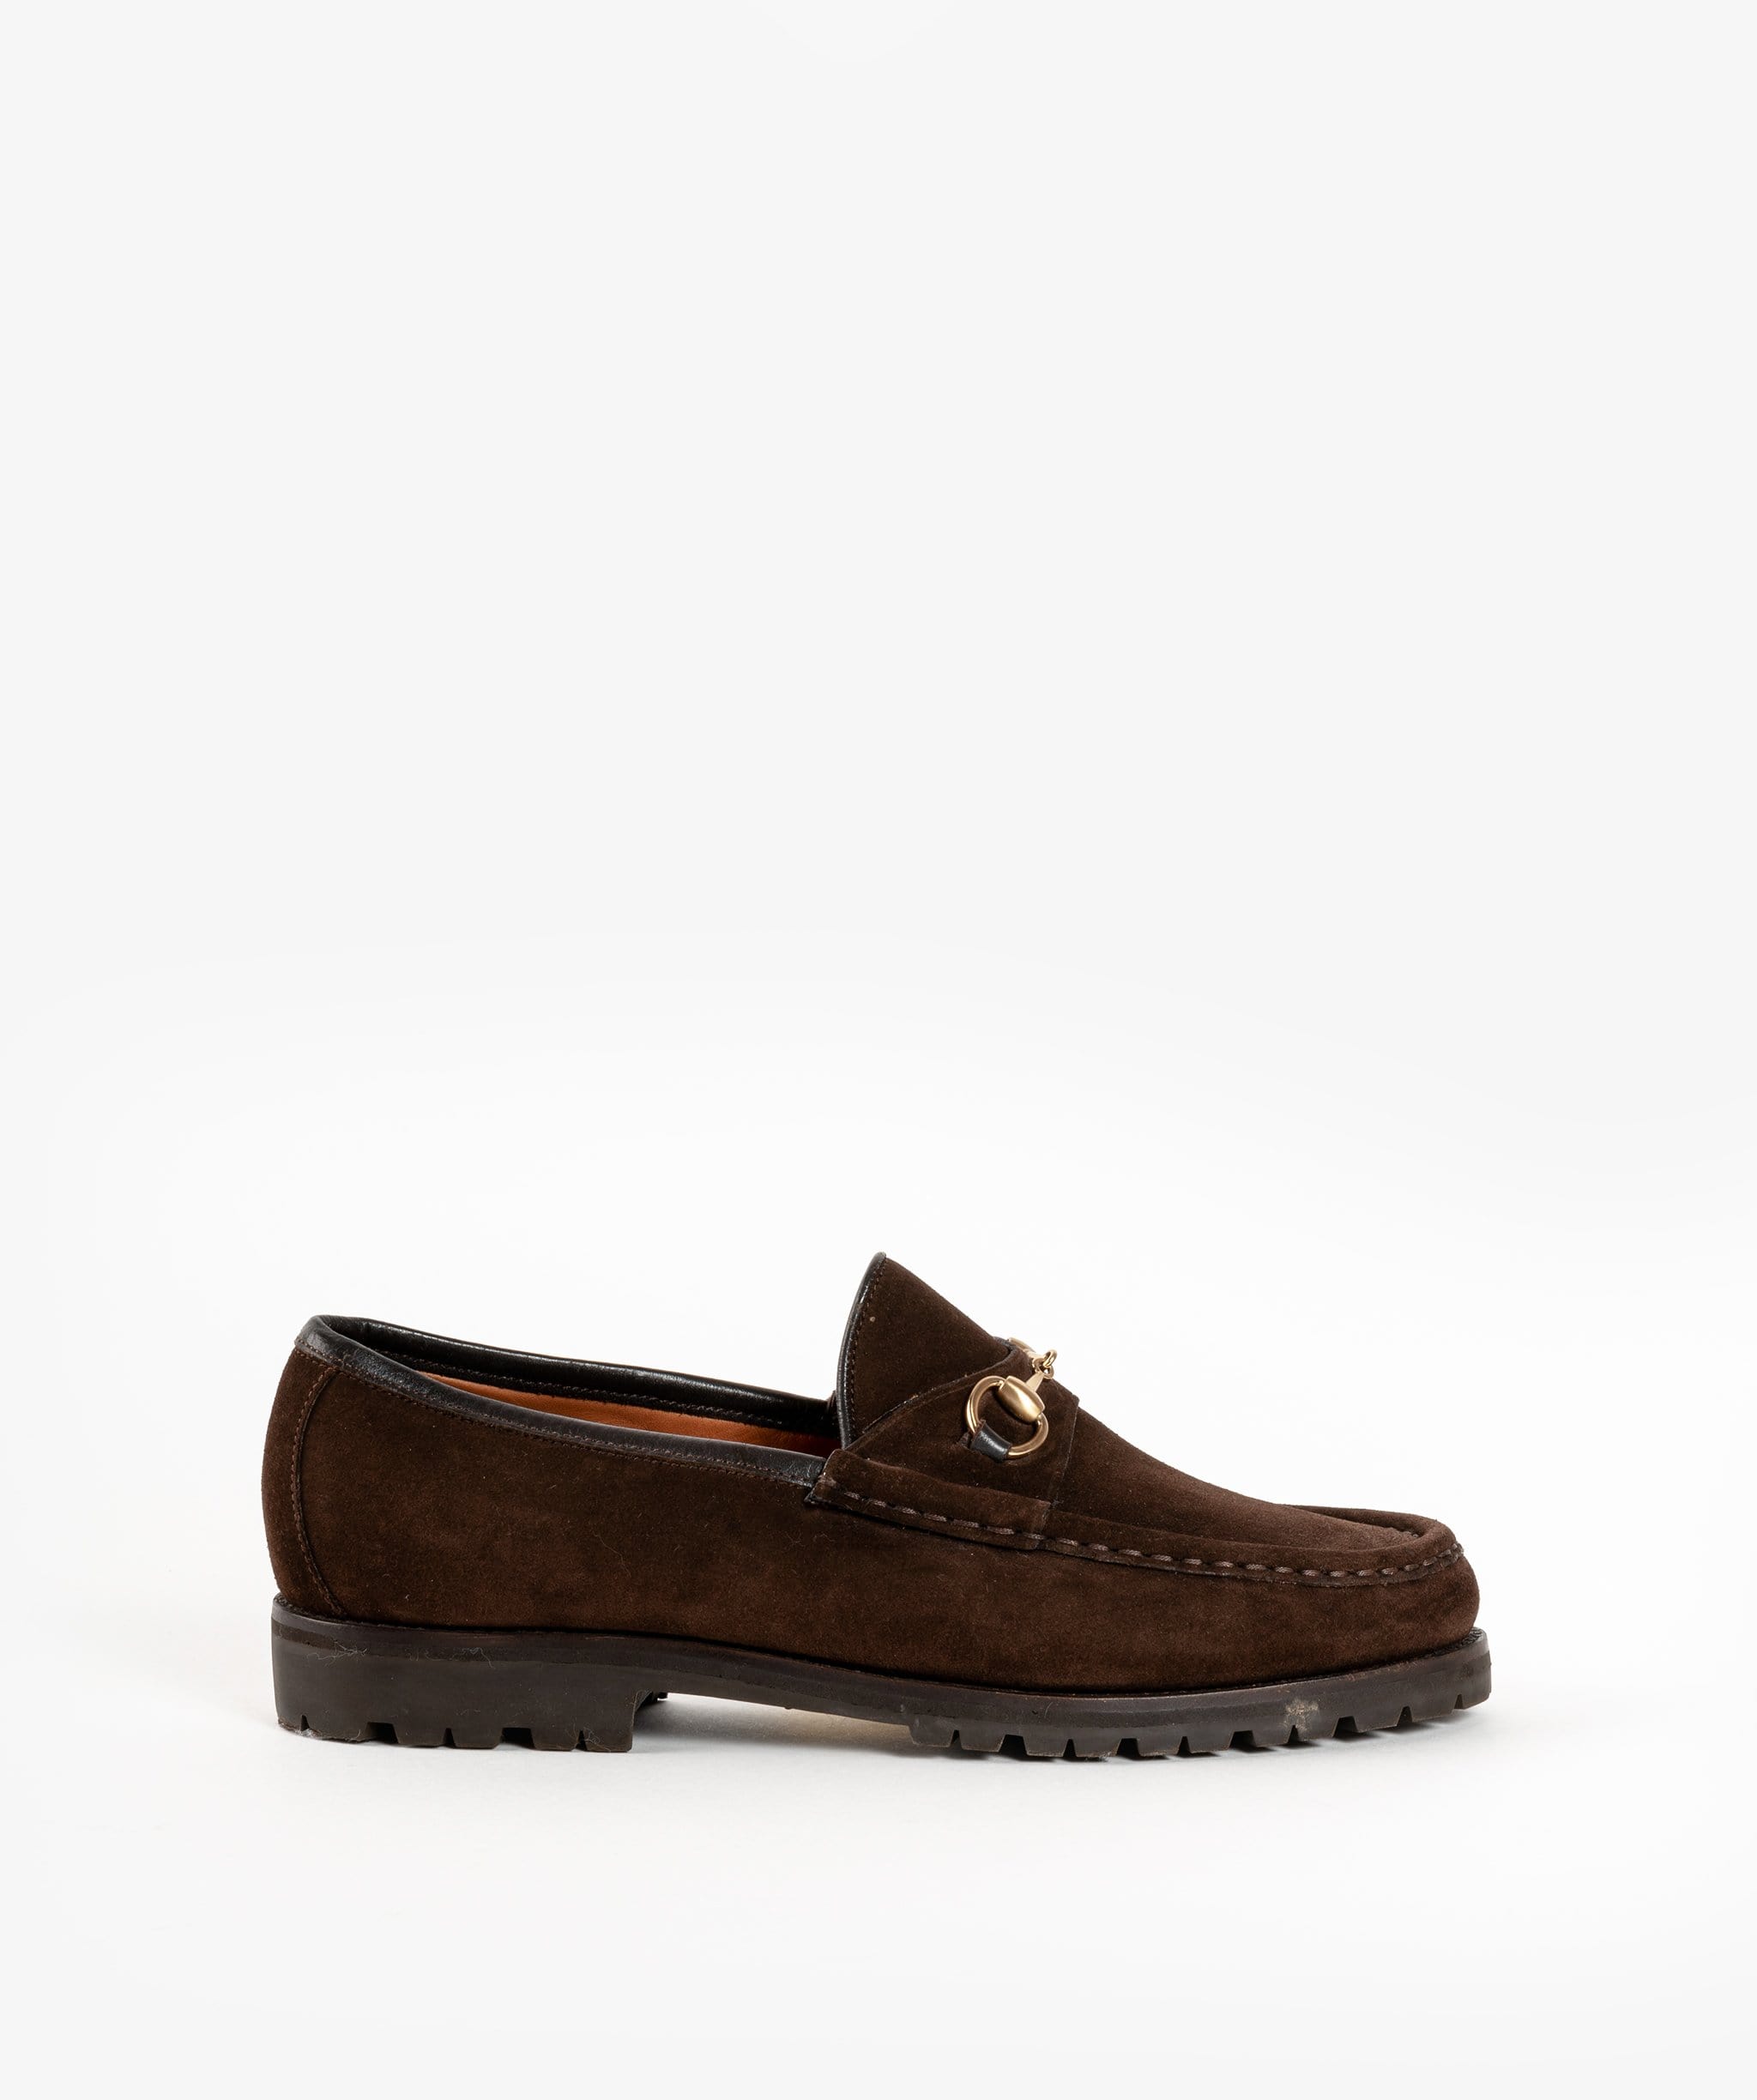 Gucci Gucci Horsebite Brown Loafers with Rubber Soles